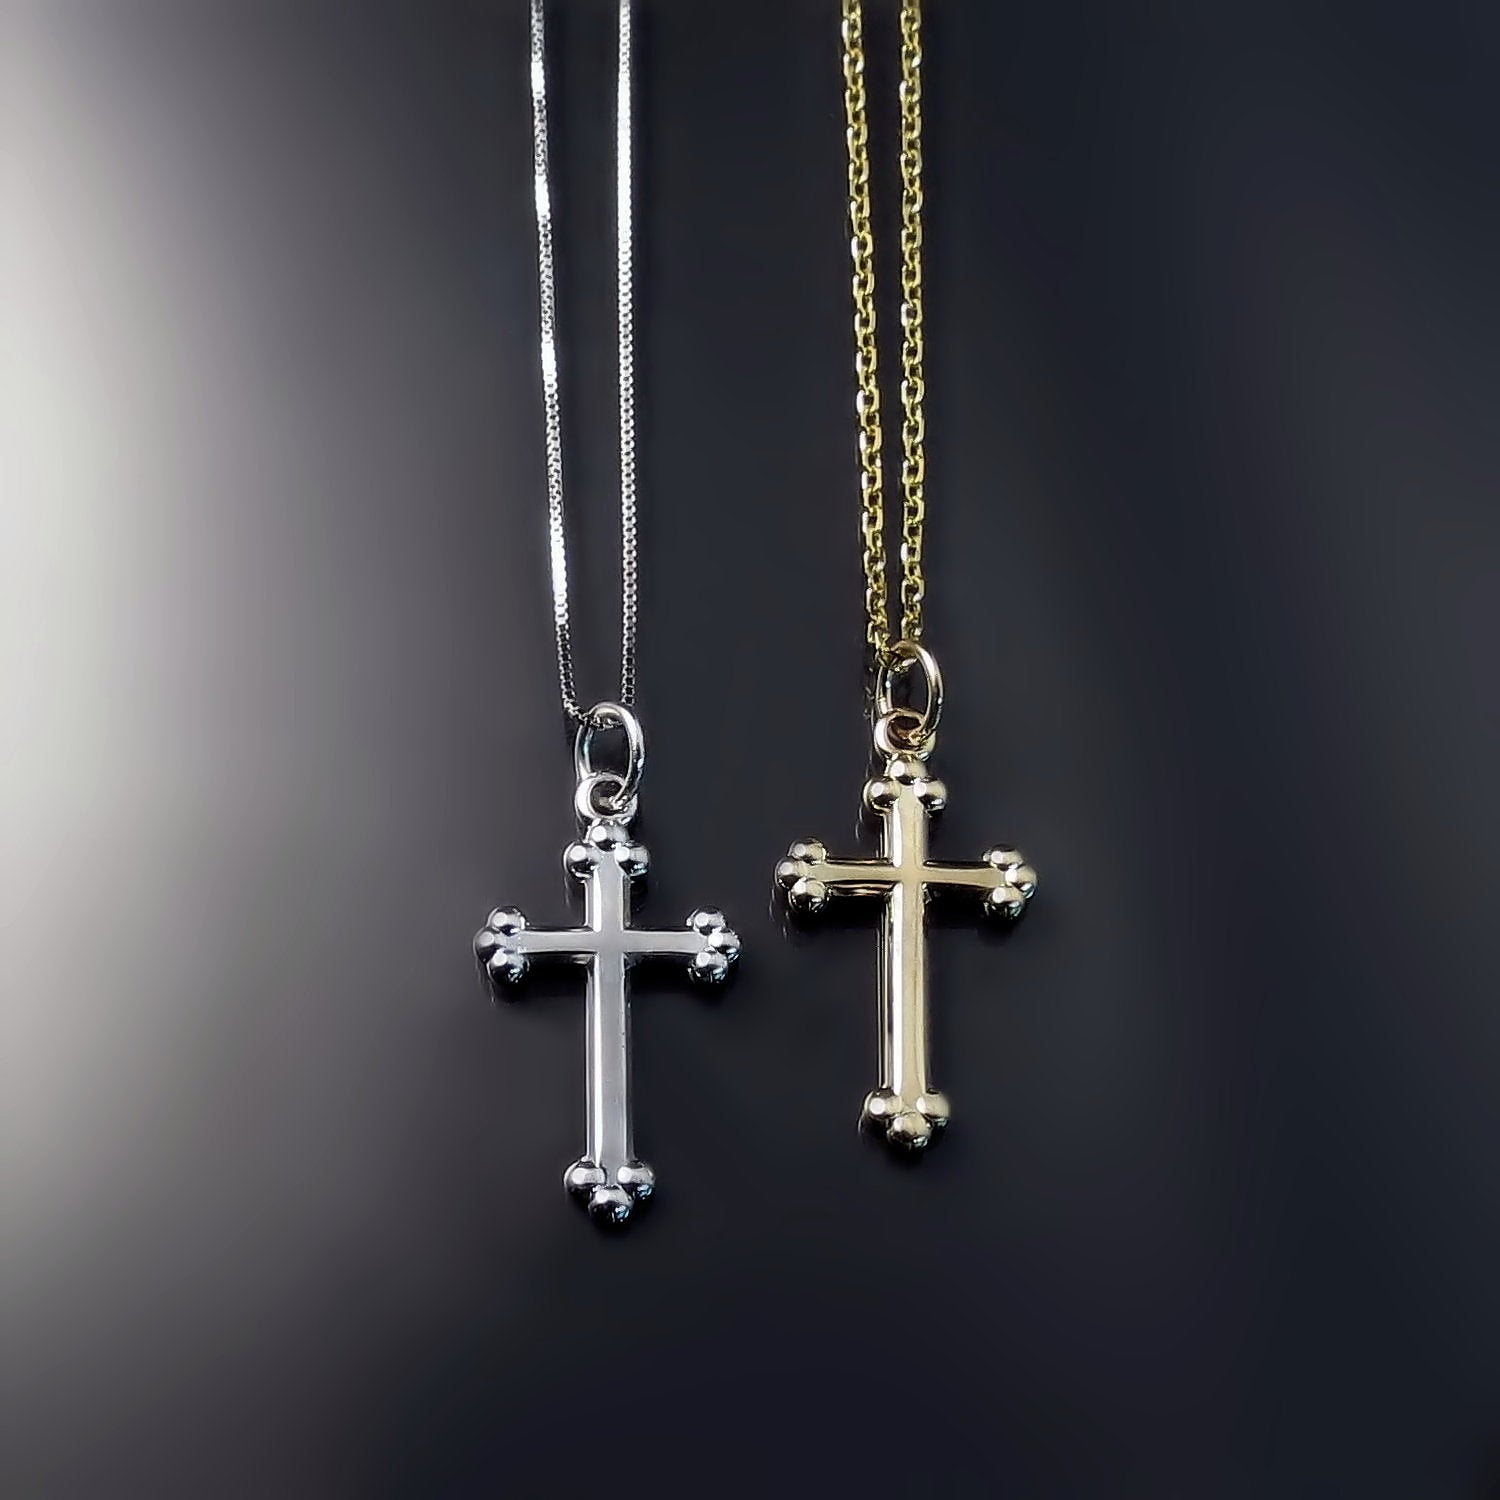 Small Orthodox Crosses for Babies and Children